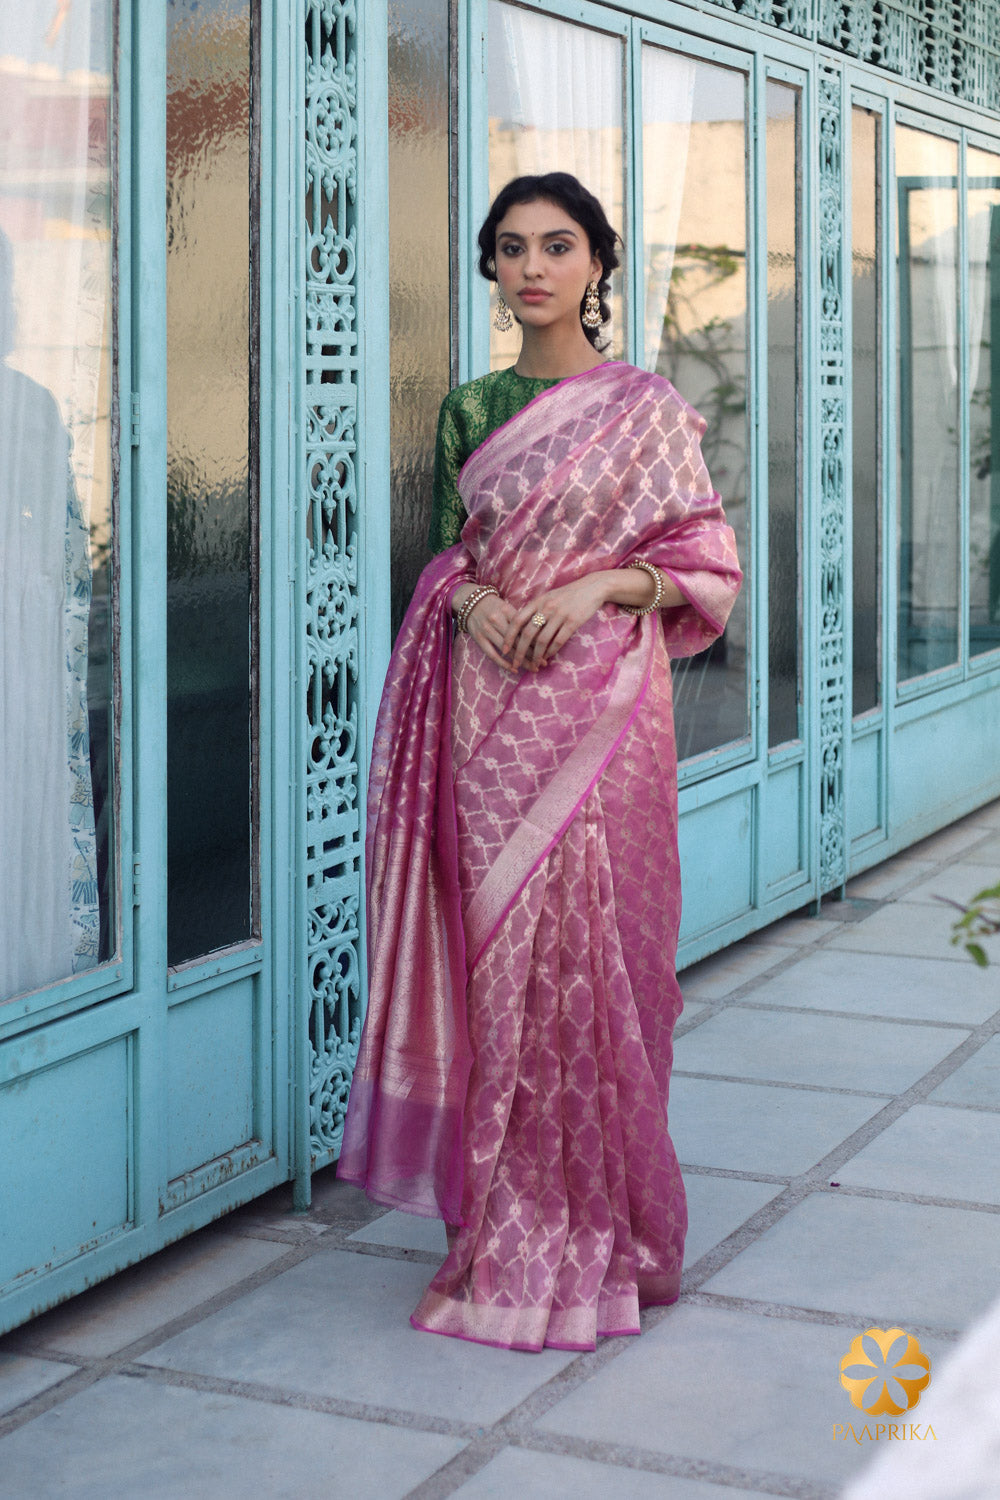 A close-up view of a handwoven pink and gold tissue saree showcasing intricate golden motifs and delicate rose petal-like shade of pink.